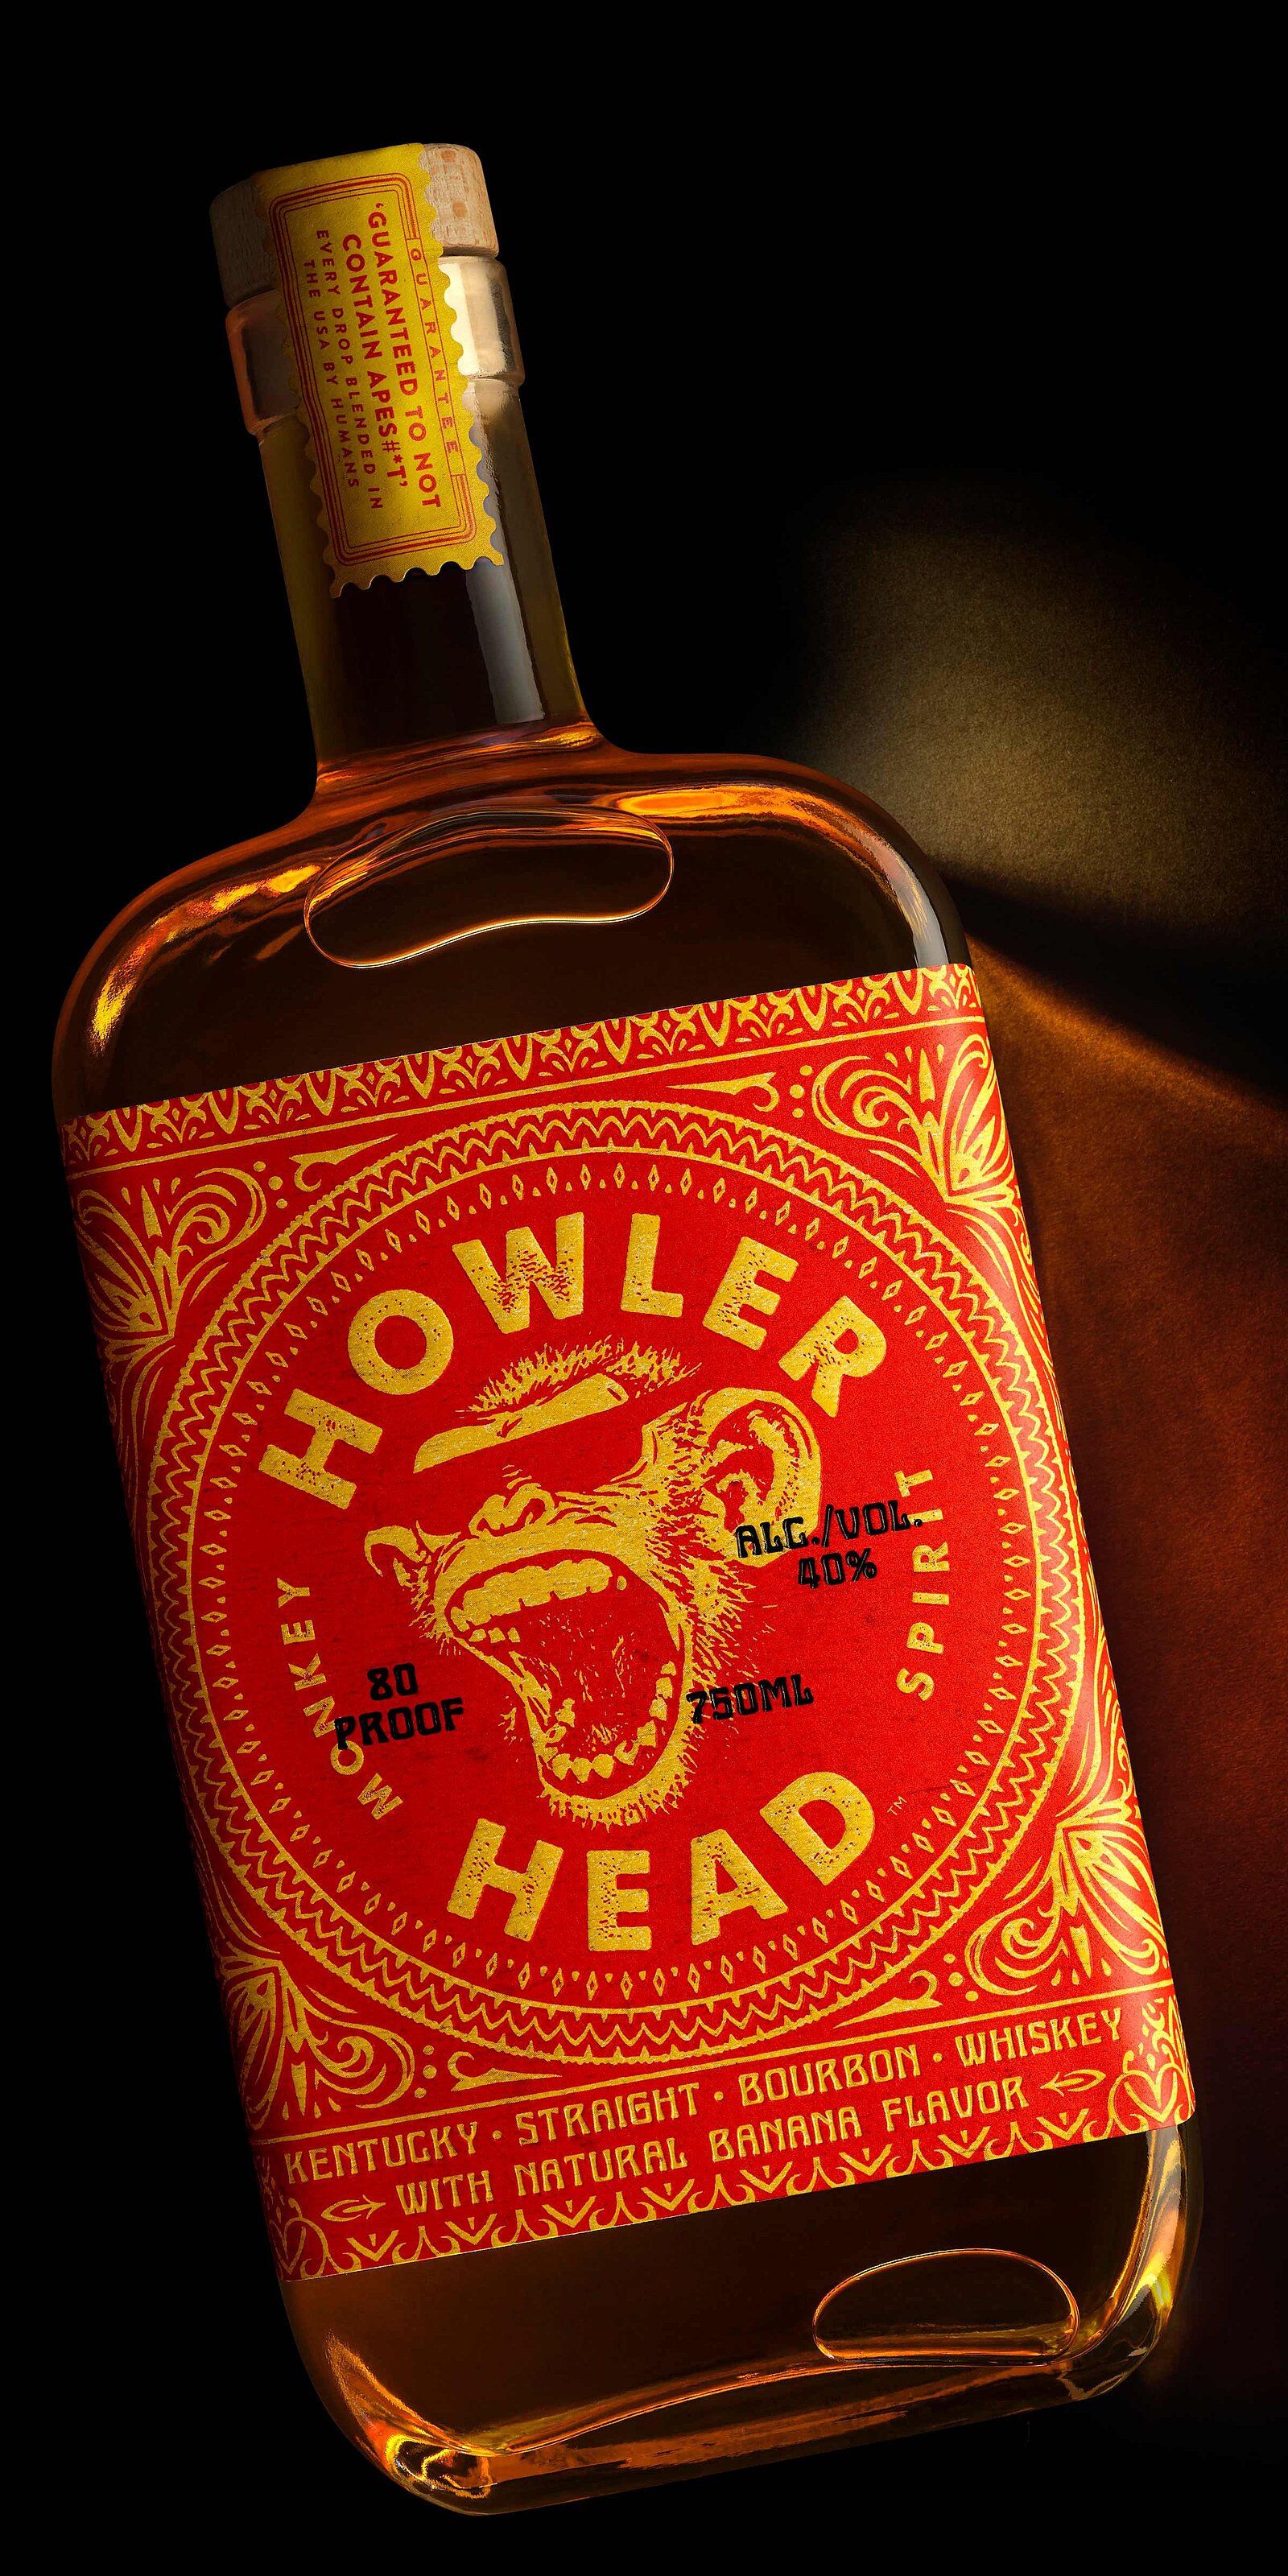 who own howler head whiskey